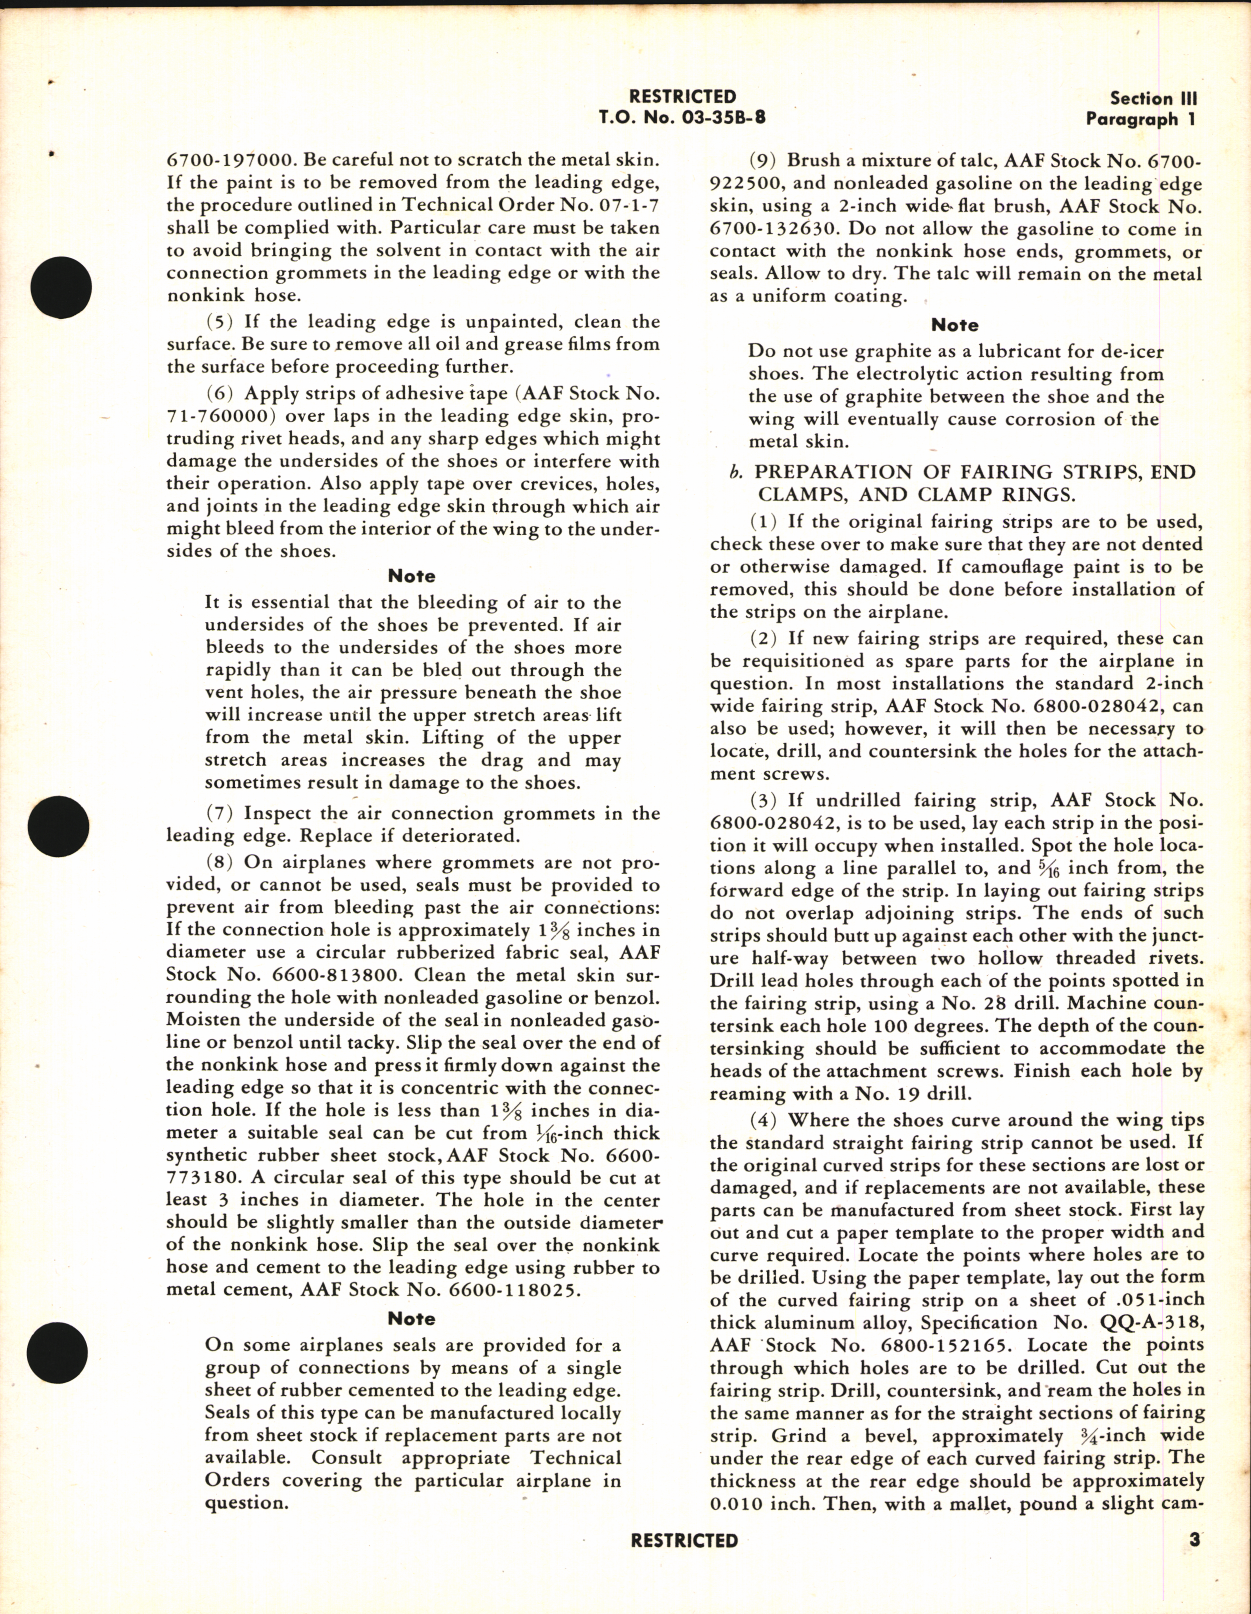 Sample page 7 from AirCorps Library document: Handbook of Instructions for Installation, Repair, and Storage of De-Icer Shoes